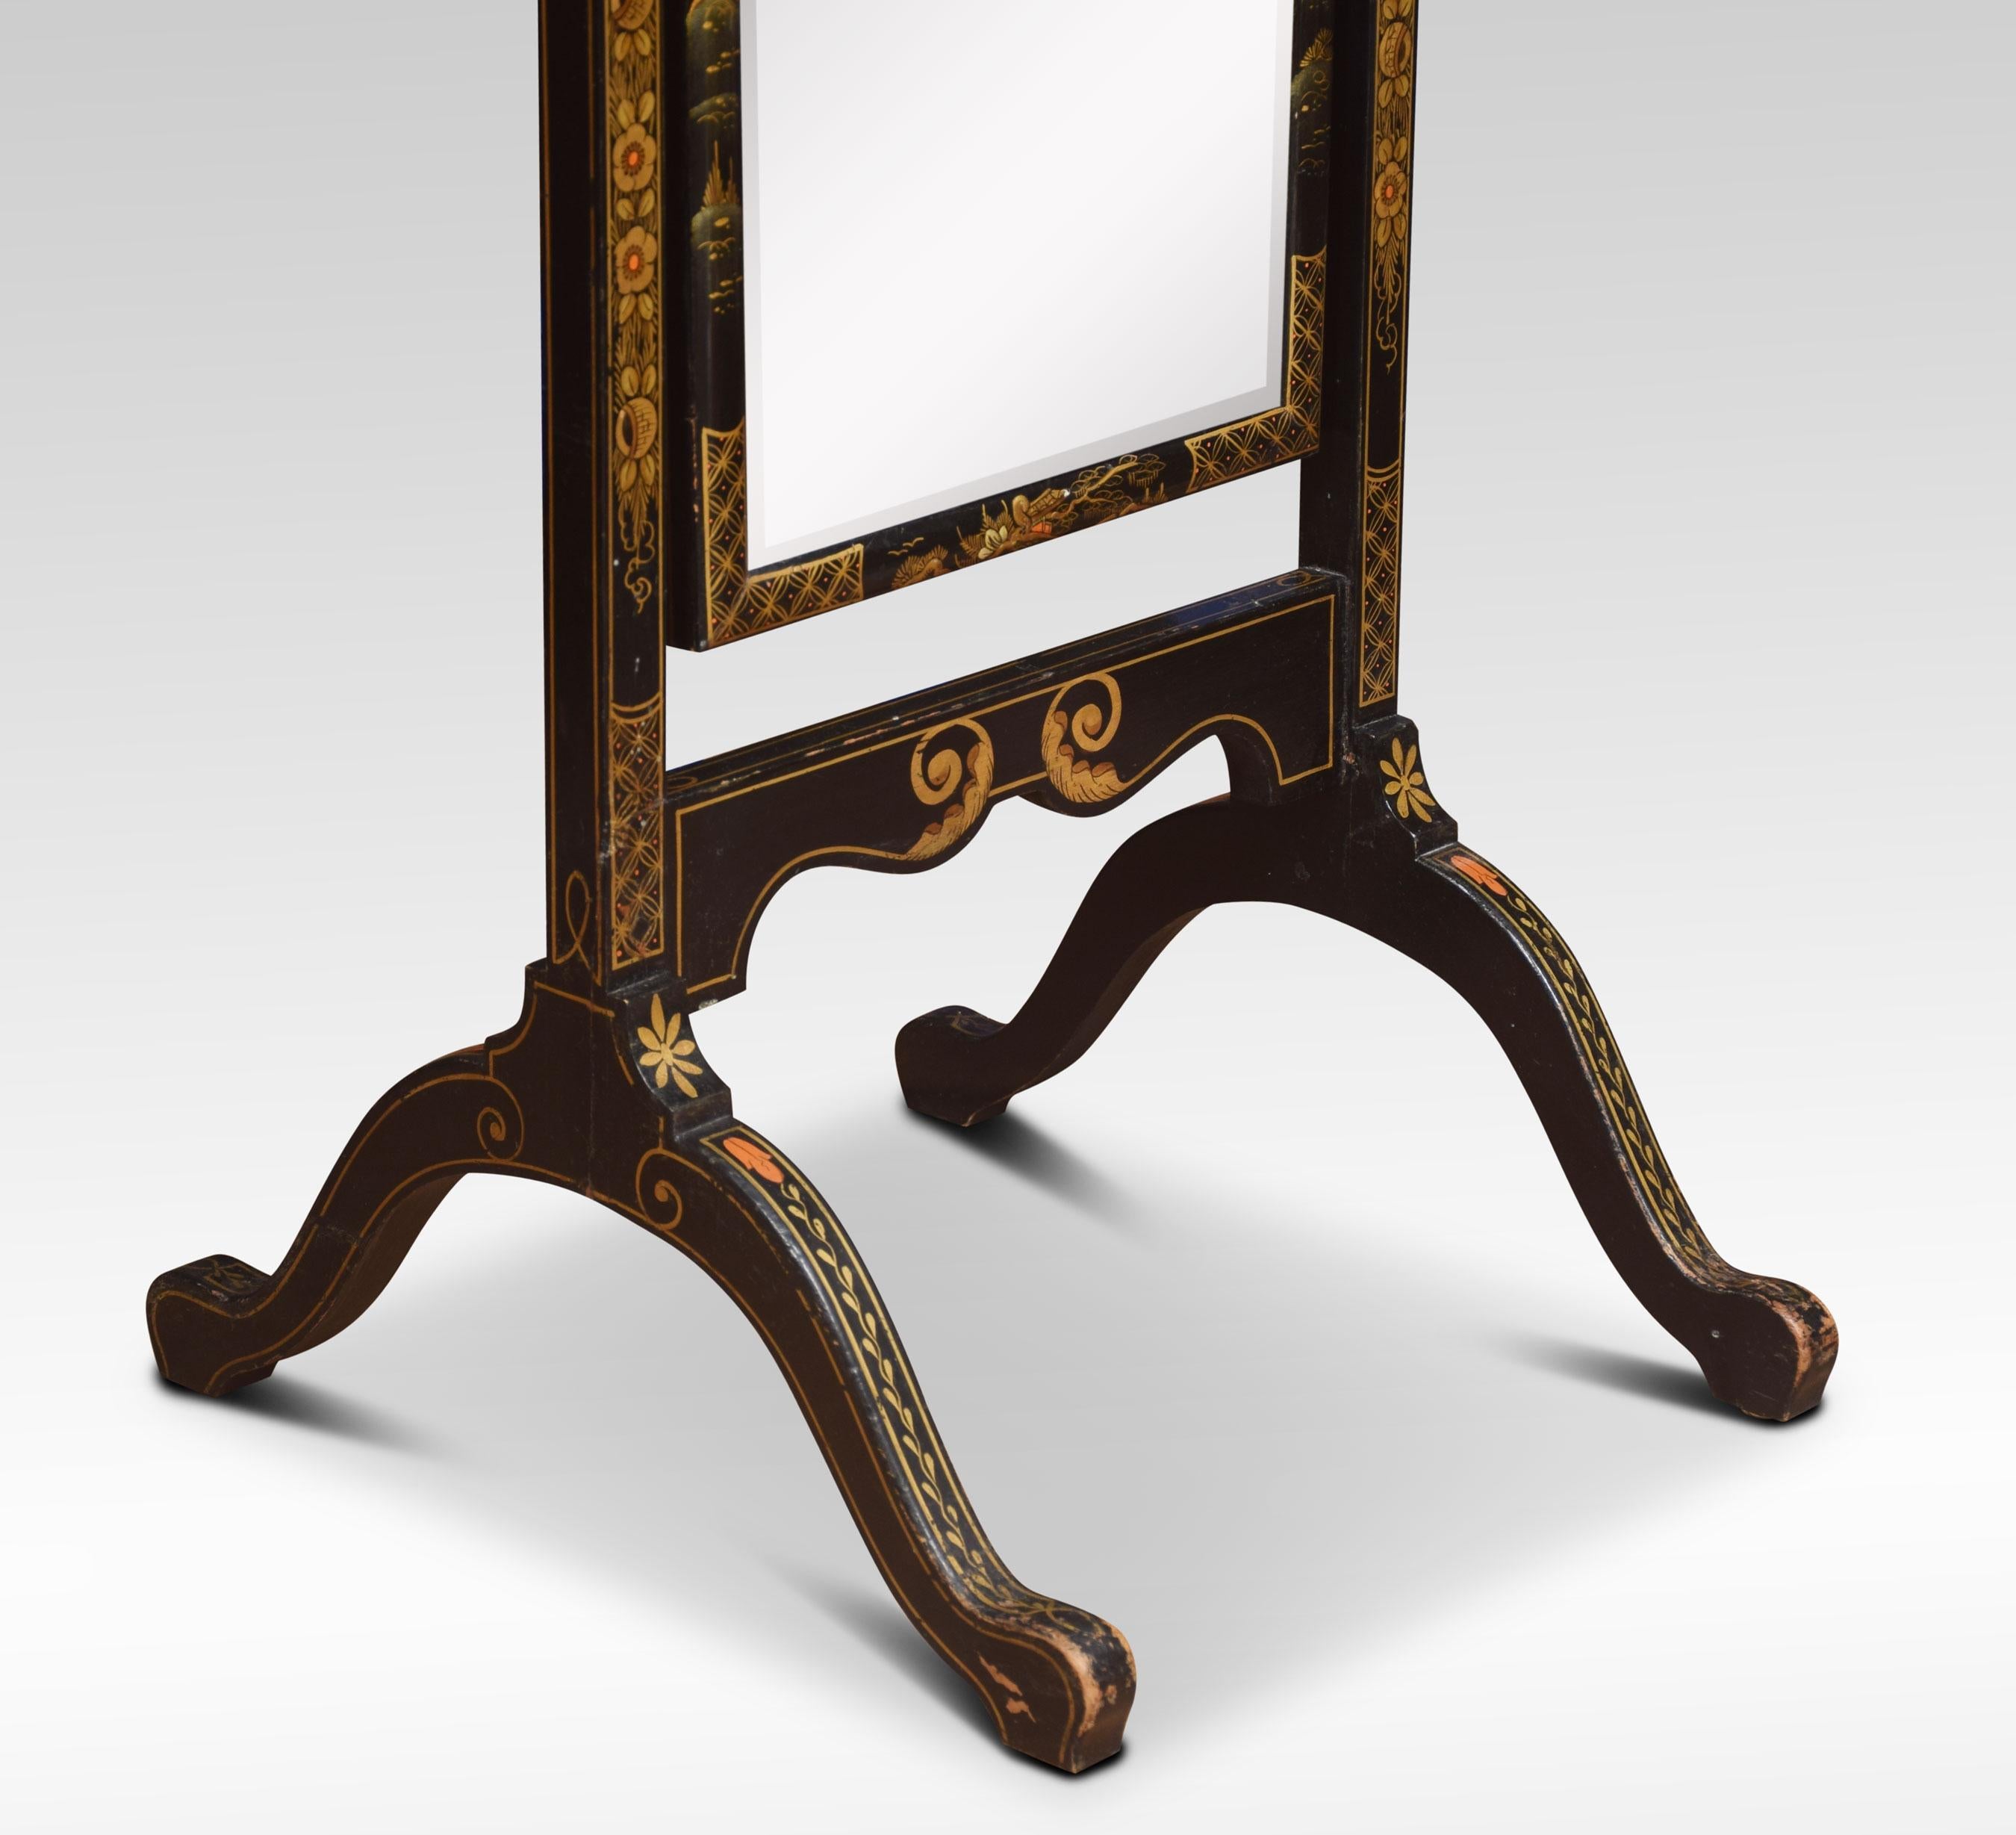 Black Japanned and parcel-gilt cheval mirror the bevelled mirror plate within a frame decorated with chinoiserie figures, leaves, flowers, scrolls and butterflies, with urn finials. All raised up on splayed legs.
Dimensions:
Height 62.5